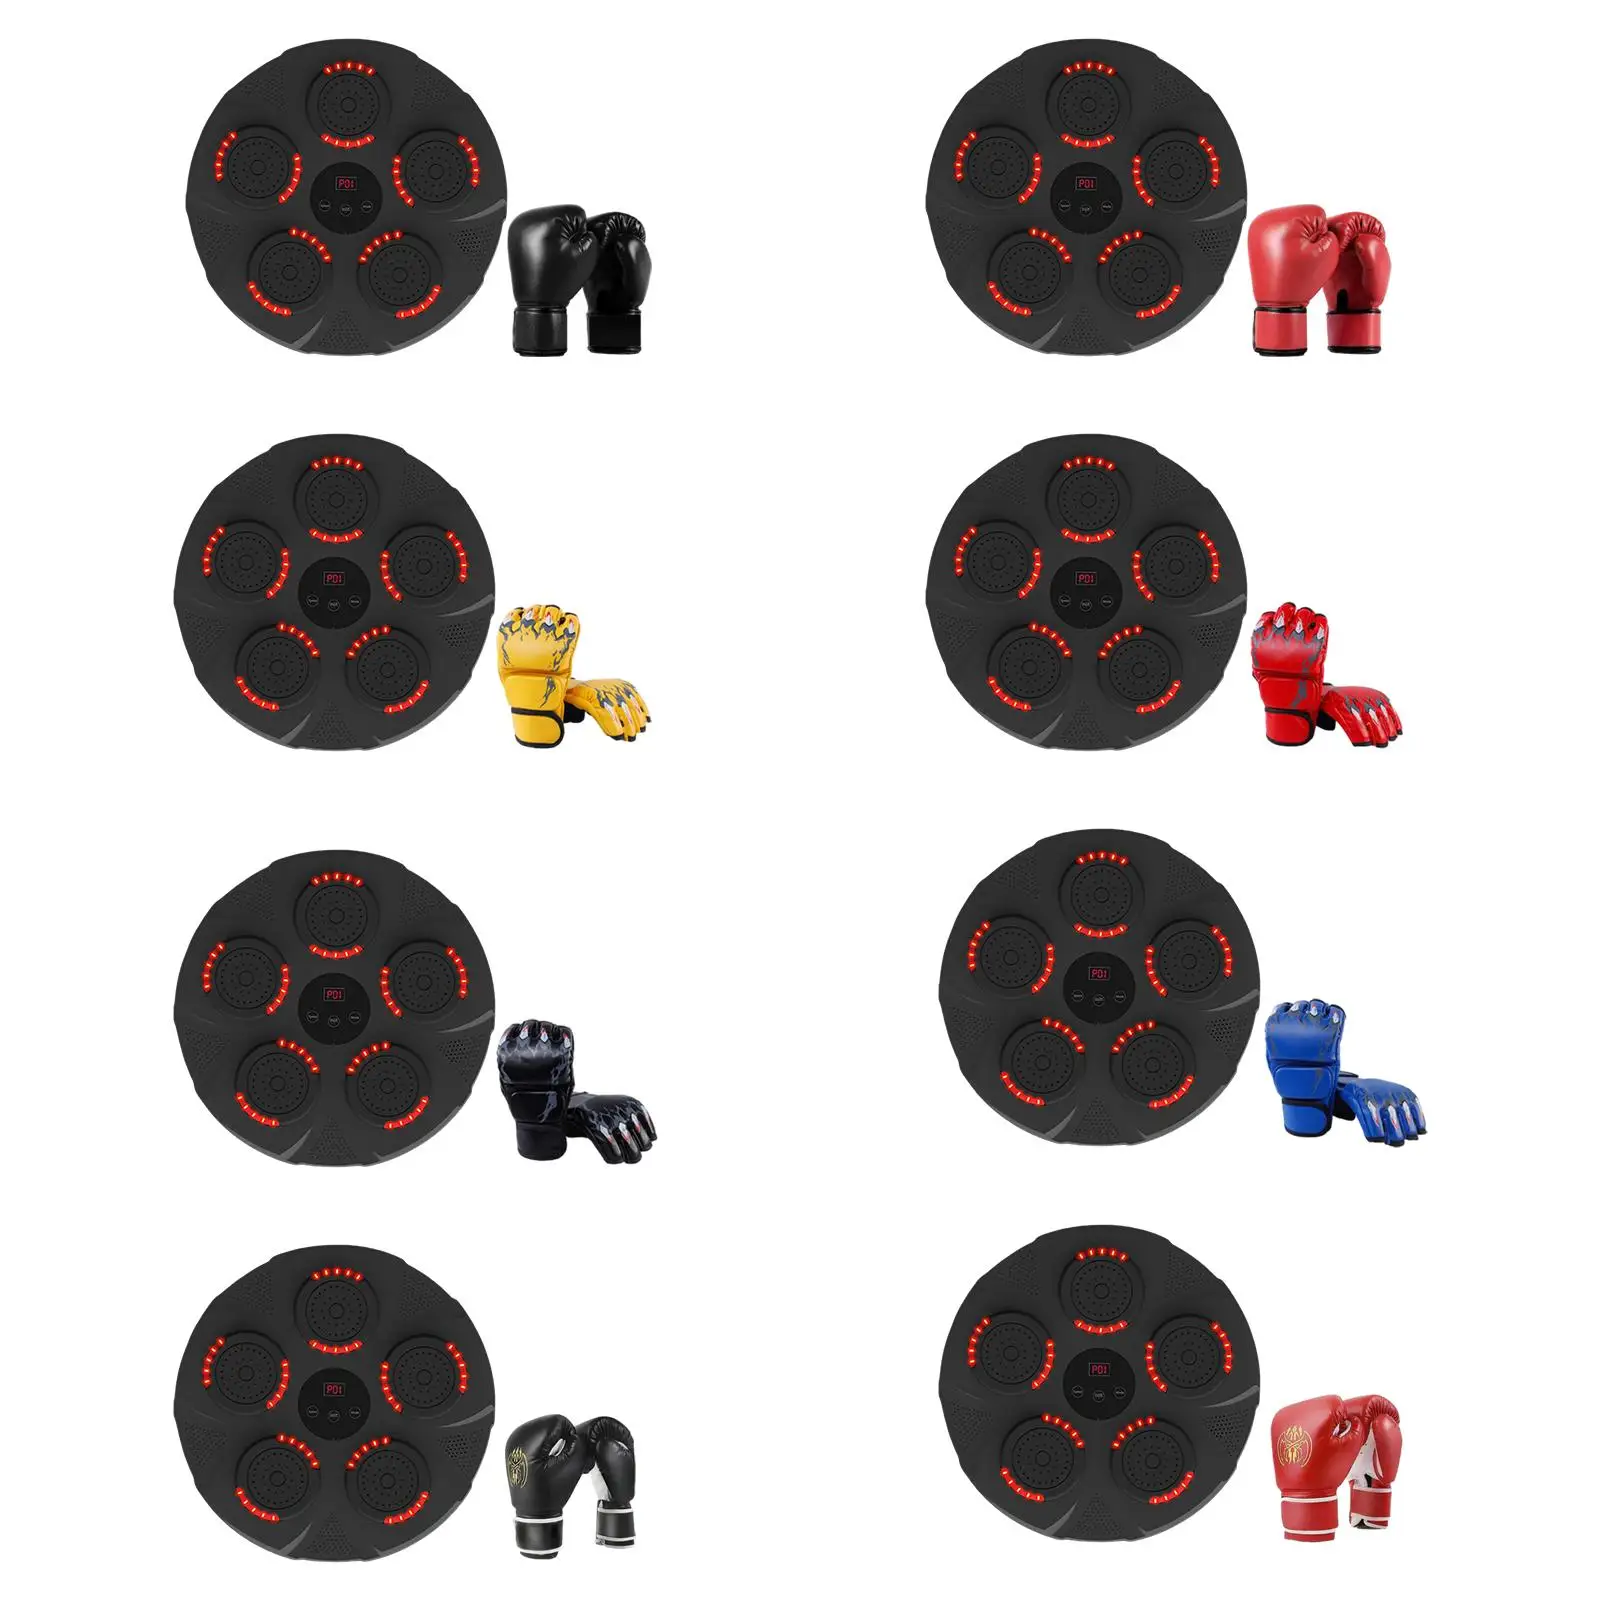 Music Boxing Training Machine Competitions Game Electronic Wall Target